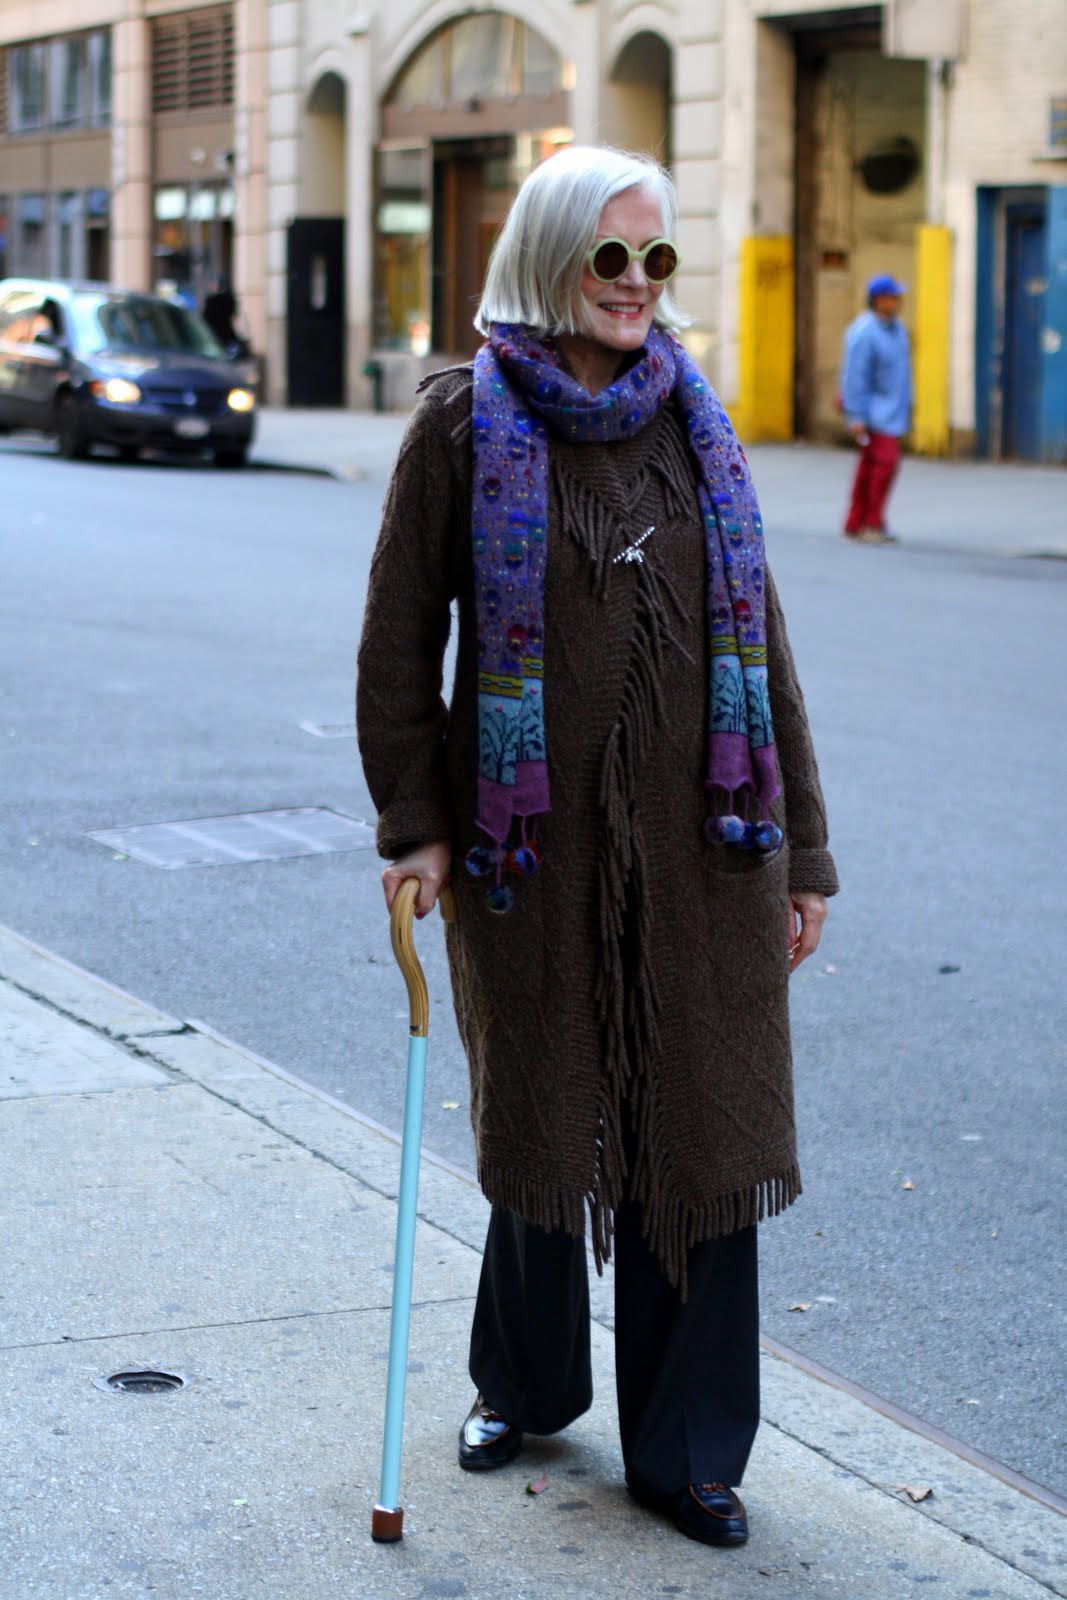 A Well Designed Cane - Advanced Style